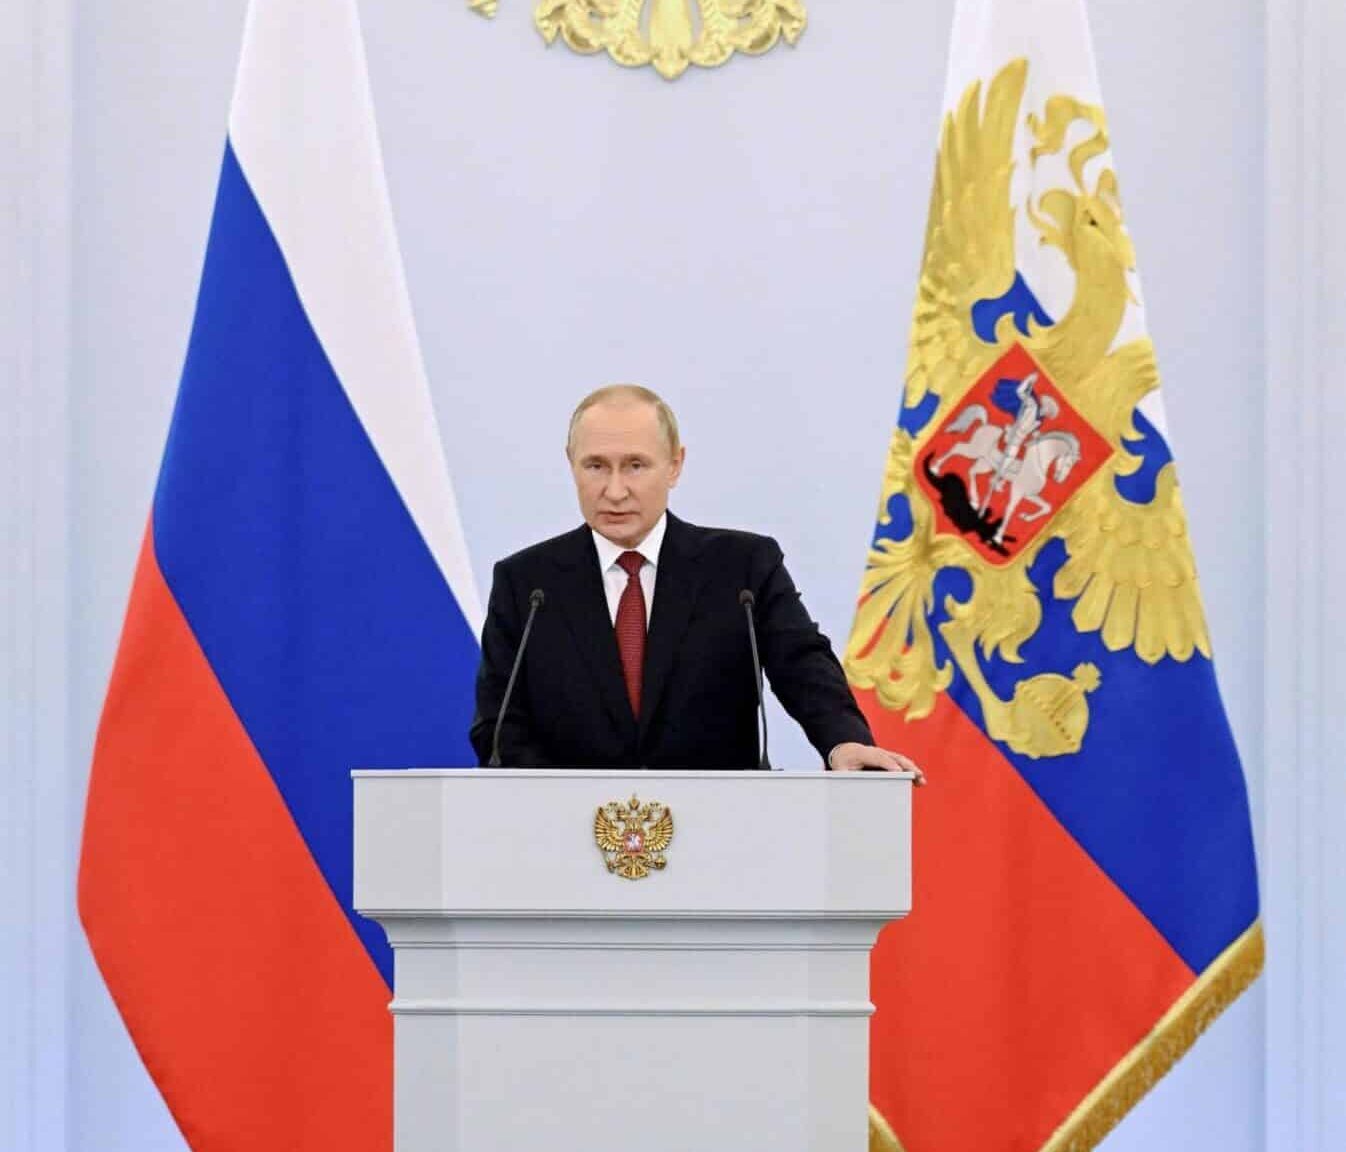 Vladimir Putin's during his speech on the occasion of signing the treaties on the accession of the DPR, LPR, Zaporozhye and Kherson regions to Russia. Photo: Grigoriy Sisoev, RIA Novosti.